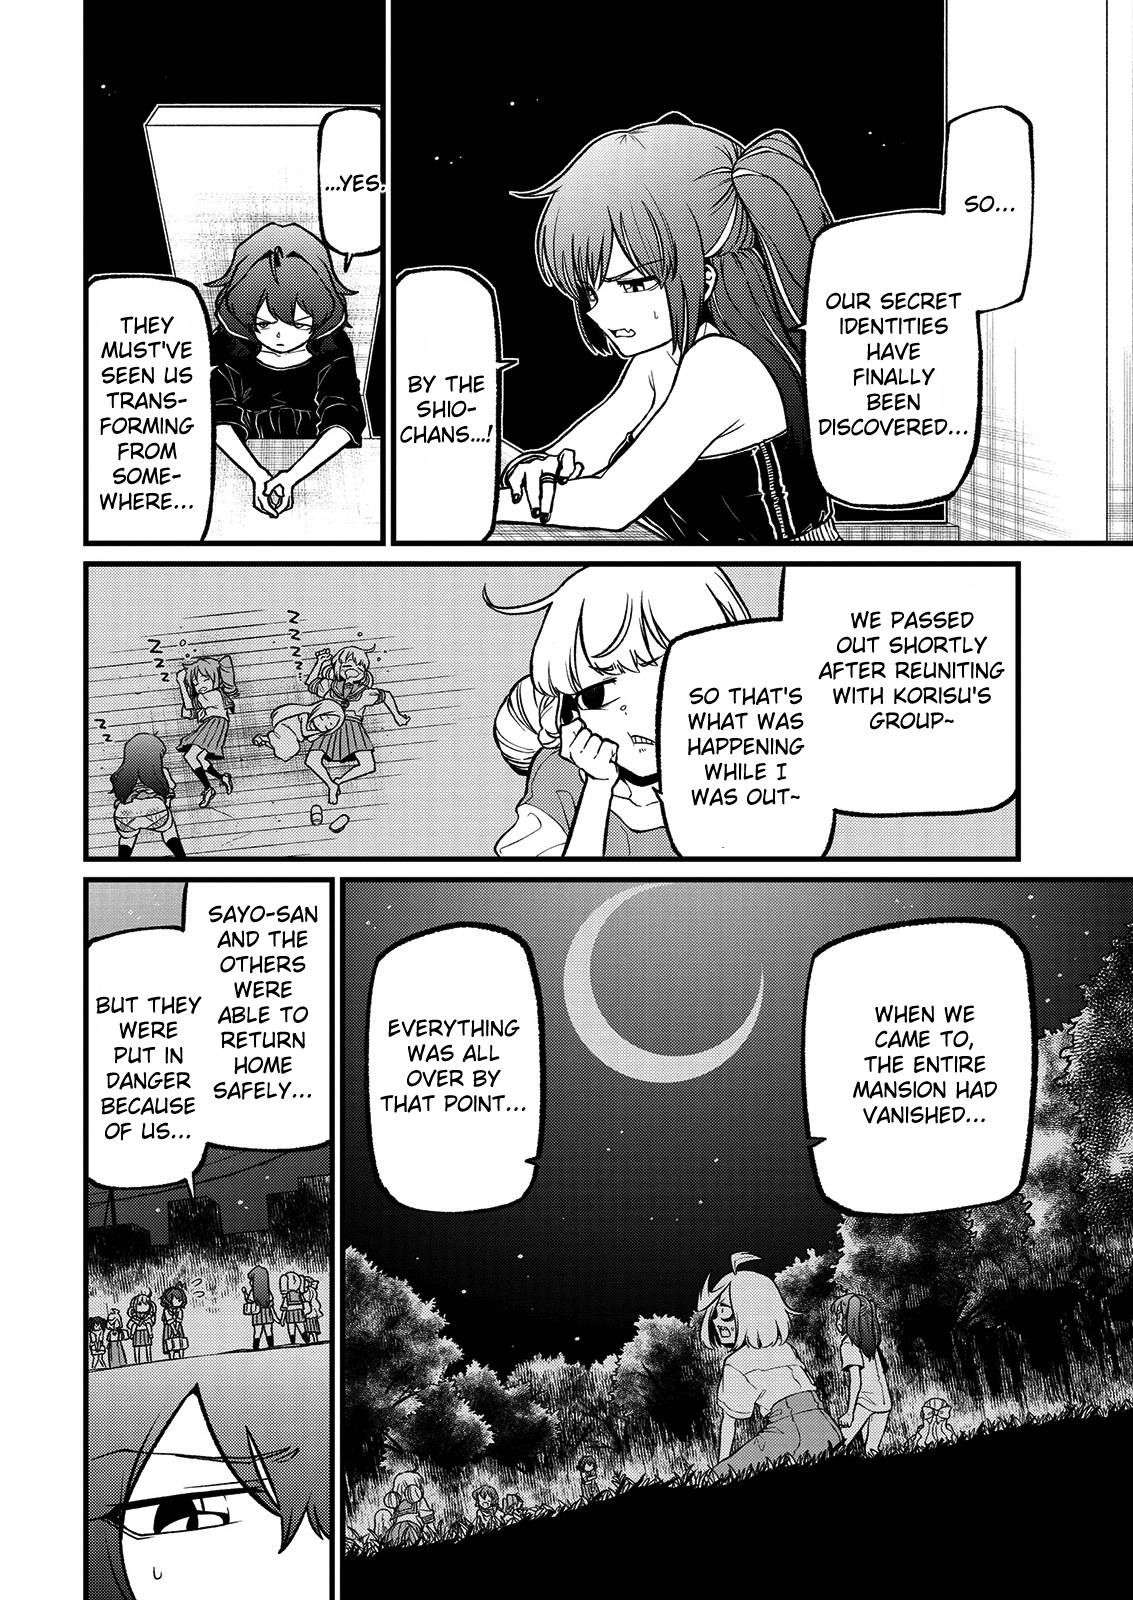 Gushing over Magical Girls - chapter 42 - #2